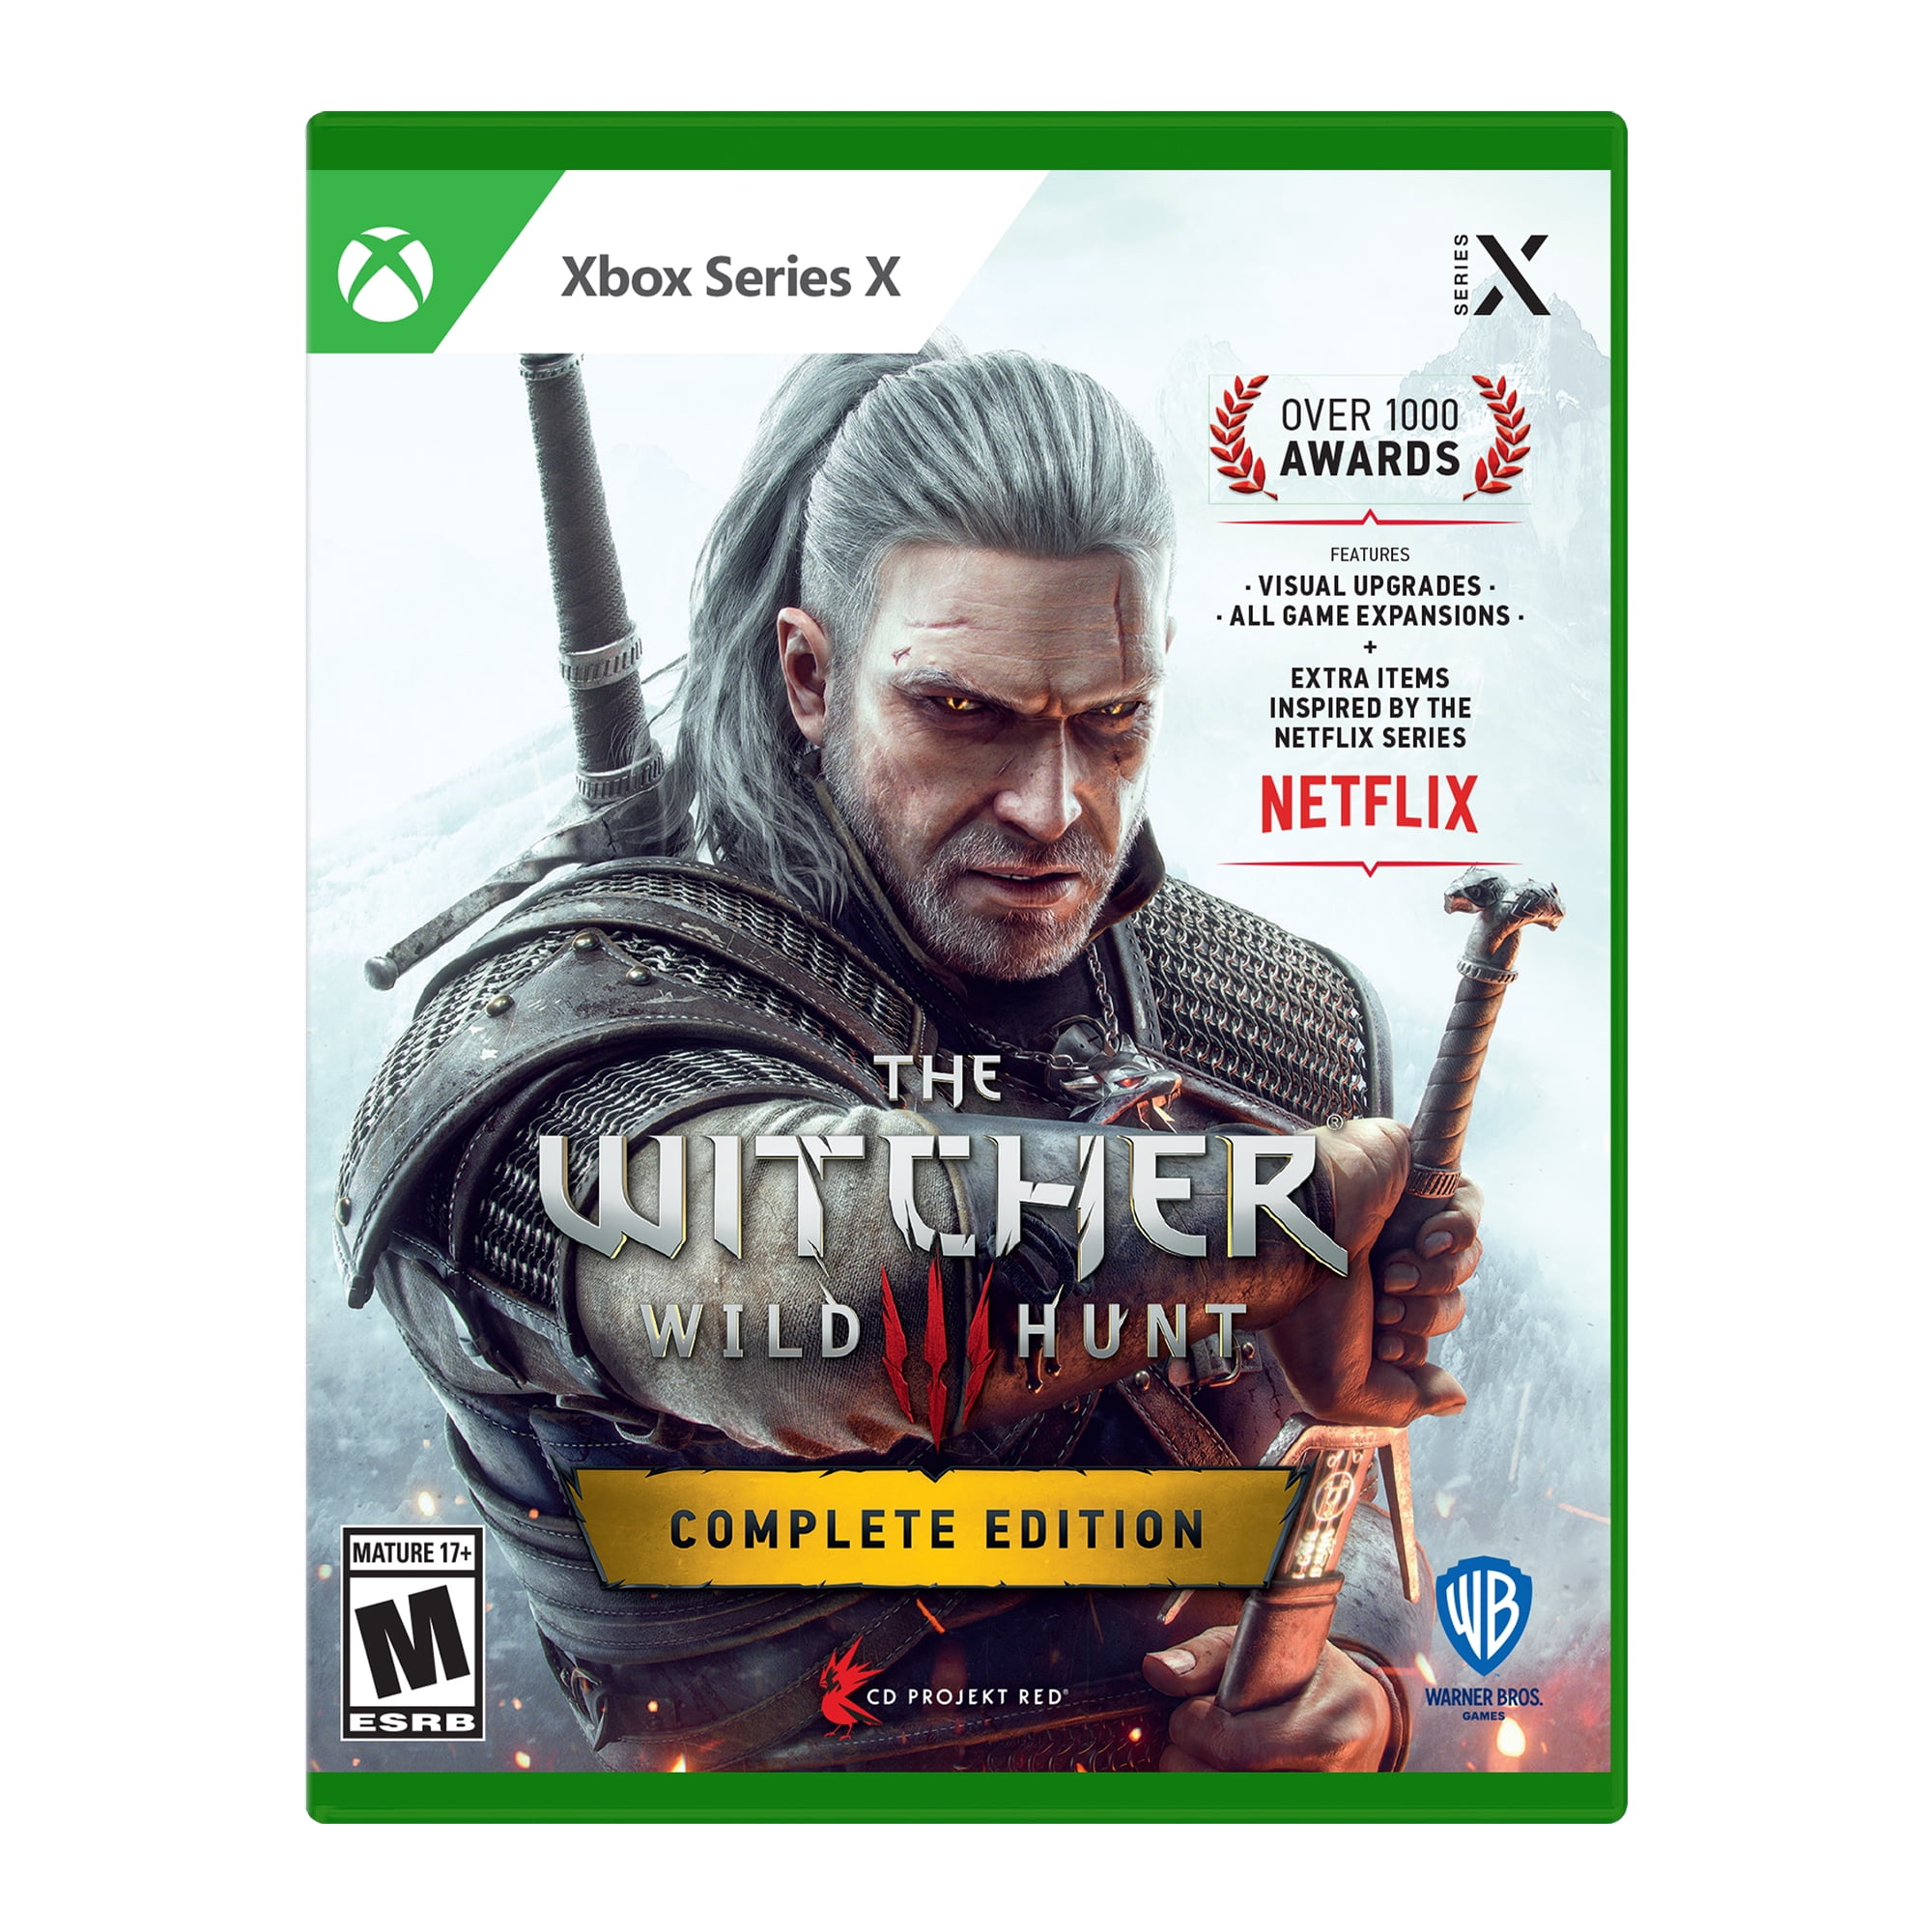 The Witcher 2 is Now Free on Xbox Live!